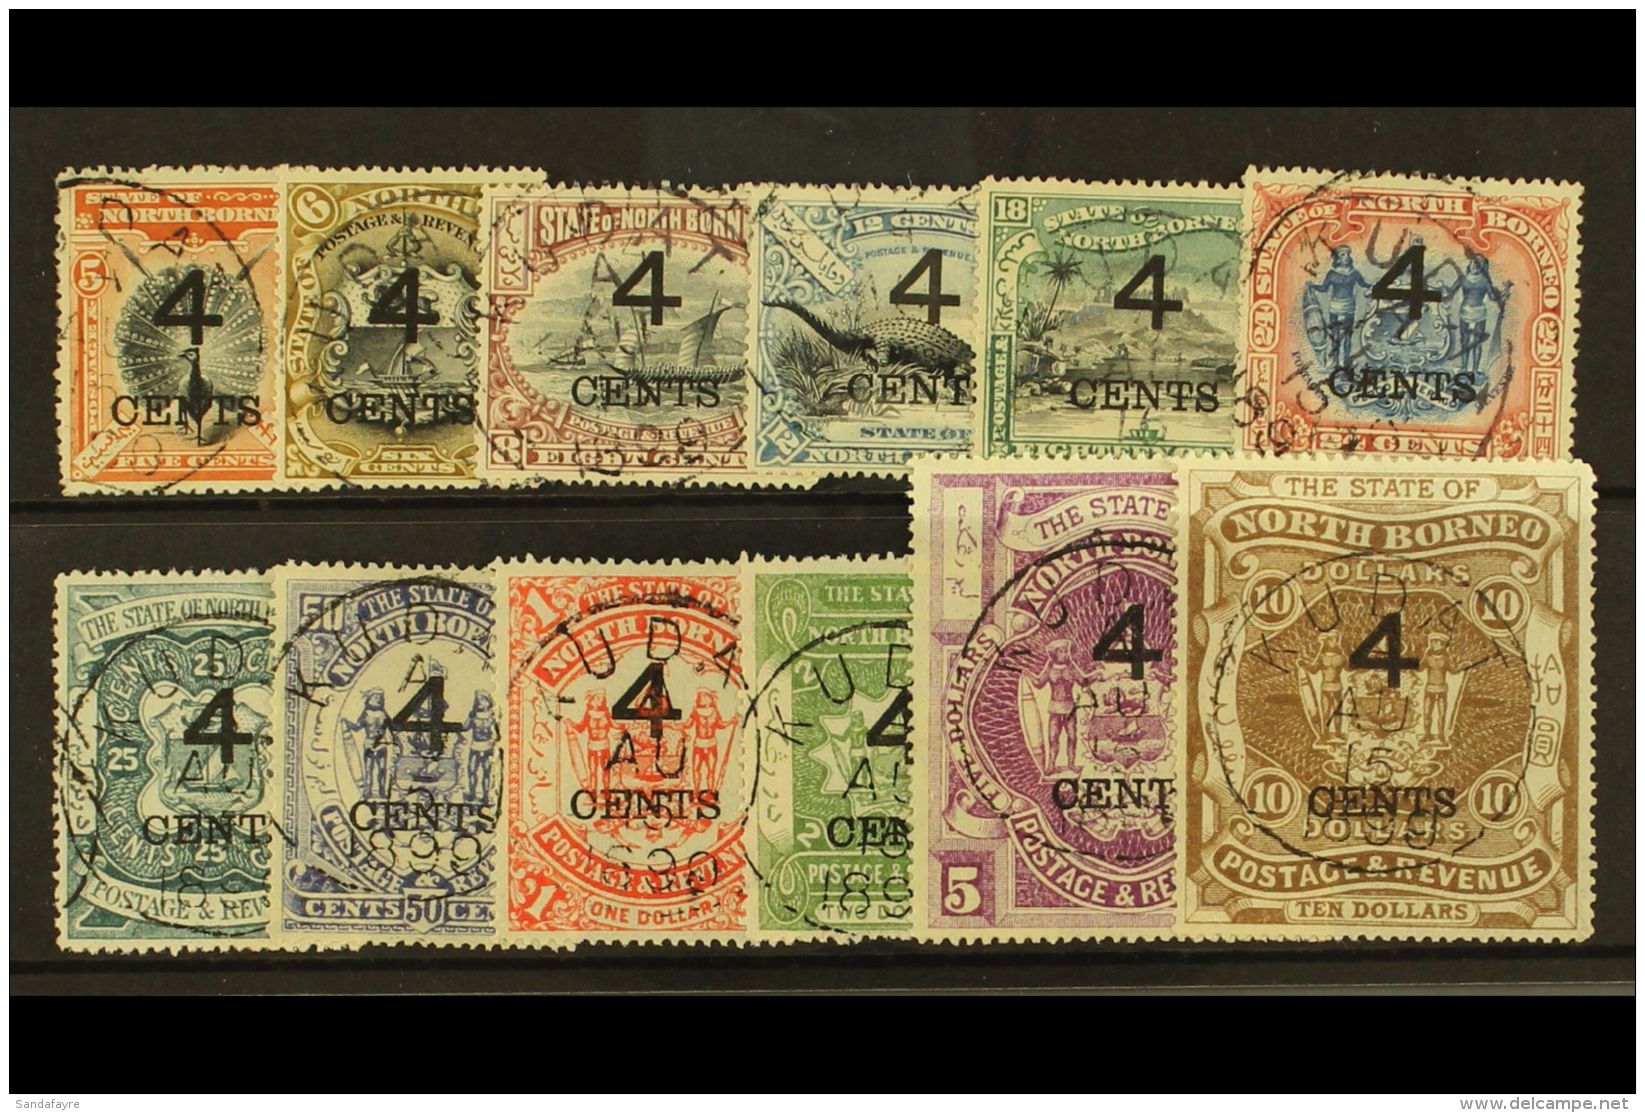 1899 4c Surcharges On 5c To $2, And Wide Setting $5 And $10, SG 112/122, 125/126, Fine Kudat Aug 15th 1899 Cds's... - Bornéo Du Nord (...-1963)